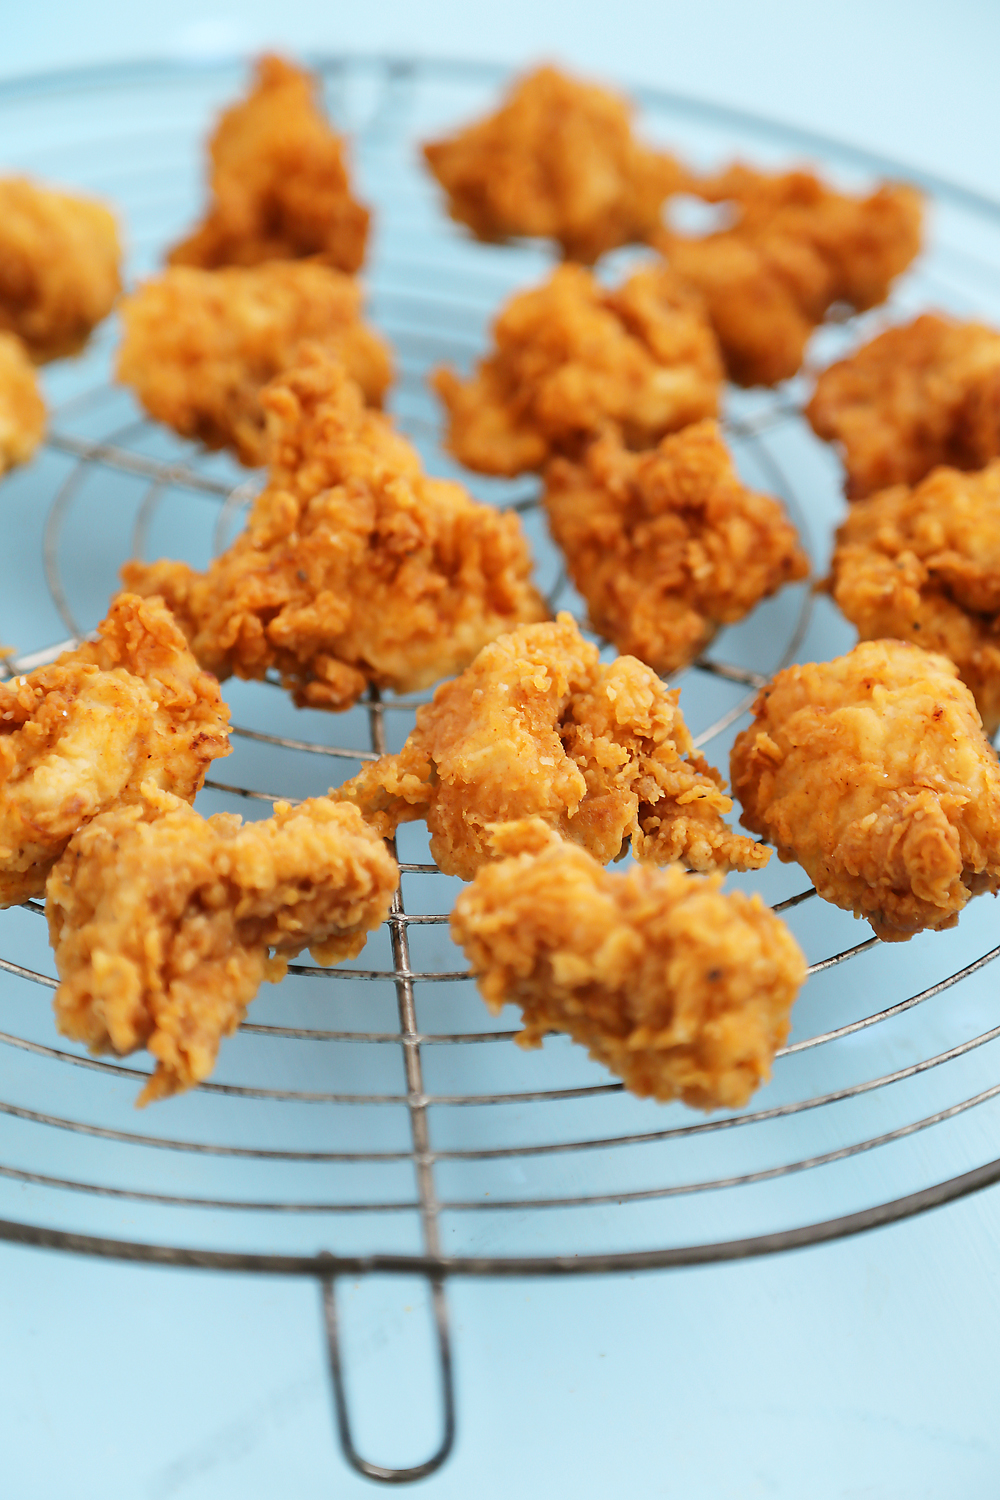 Crispy Buttermilk Popcorn Chicken - Super easy, crispy popcorn chicken made with few ingredients! Serve at parties or for weeknight meals with hot sauce, honey or Ranch dressing. Thecomfortofcooking.com